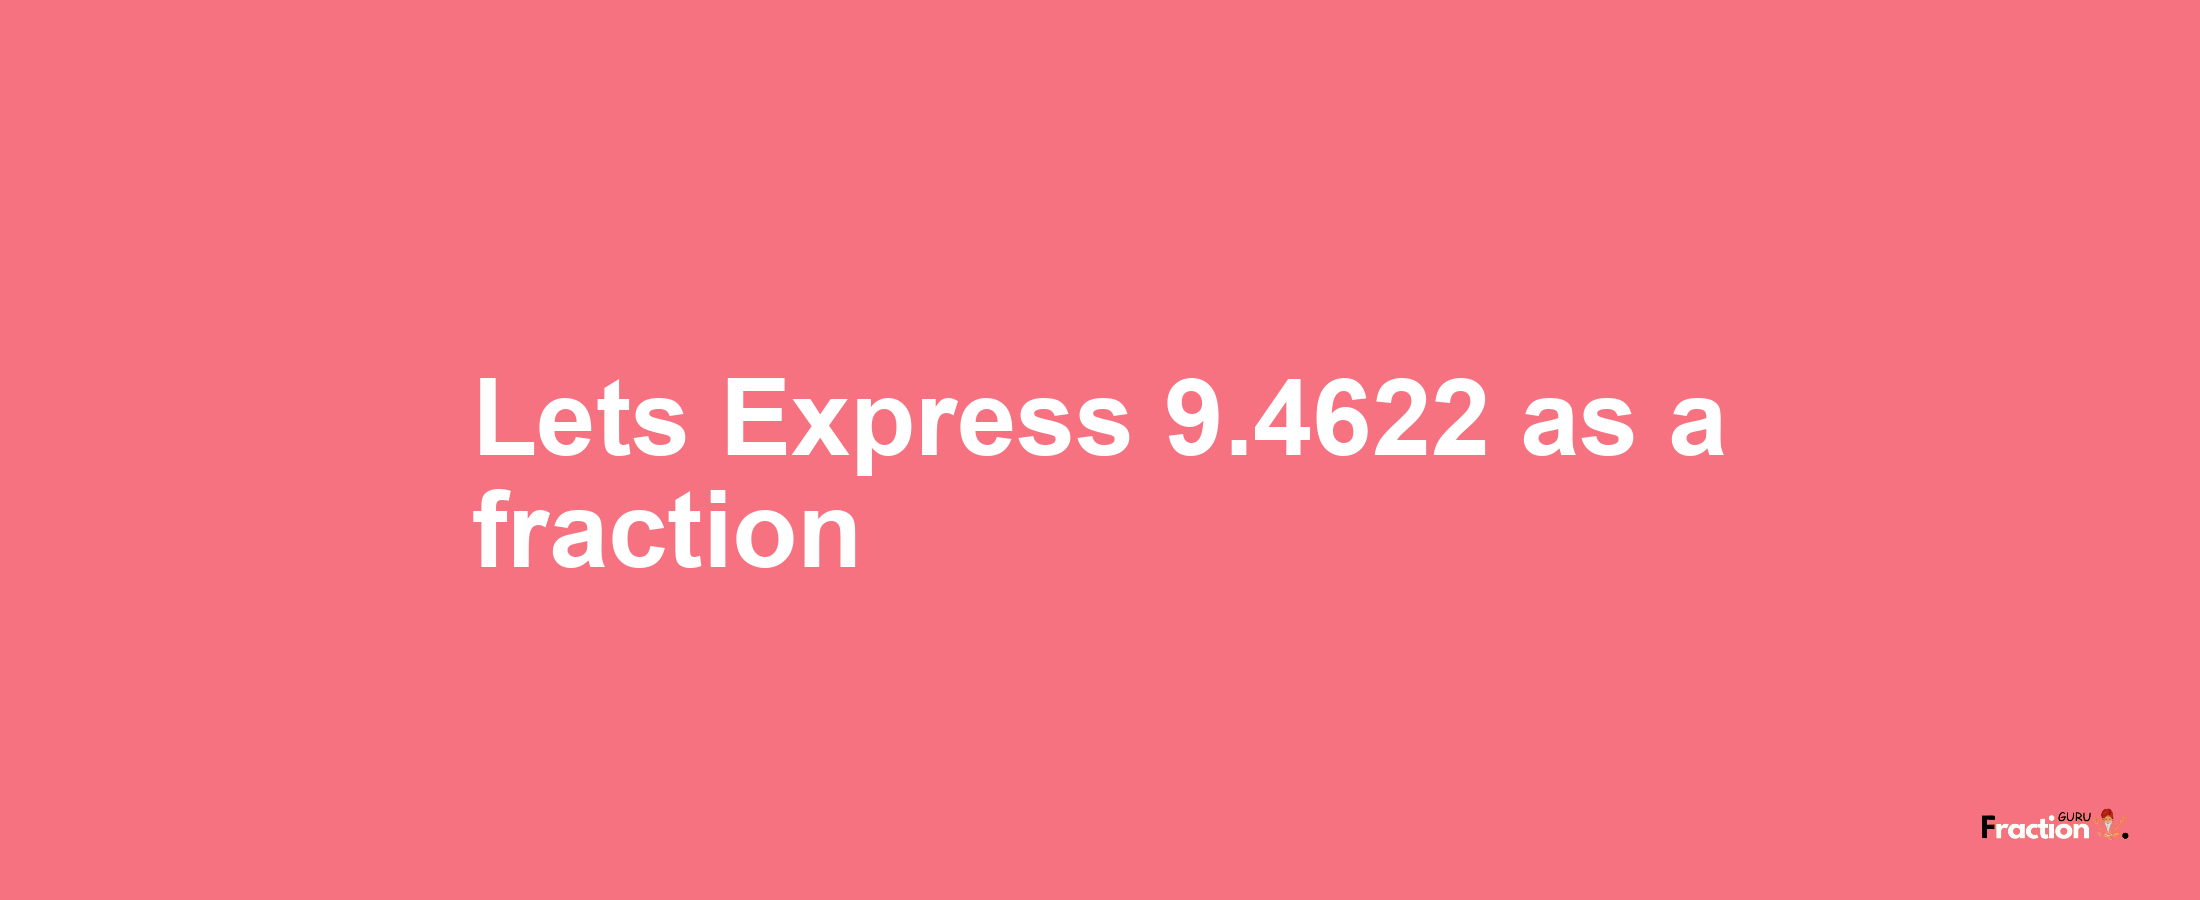 Lets Express 9.4622 as afraction